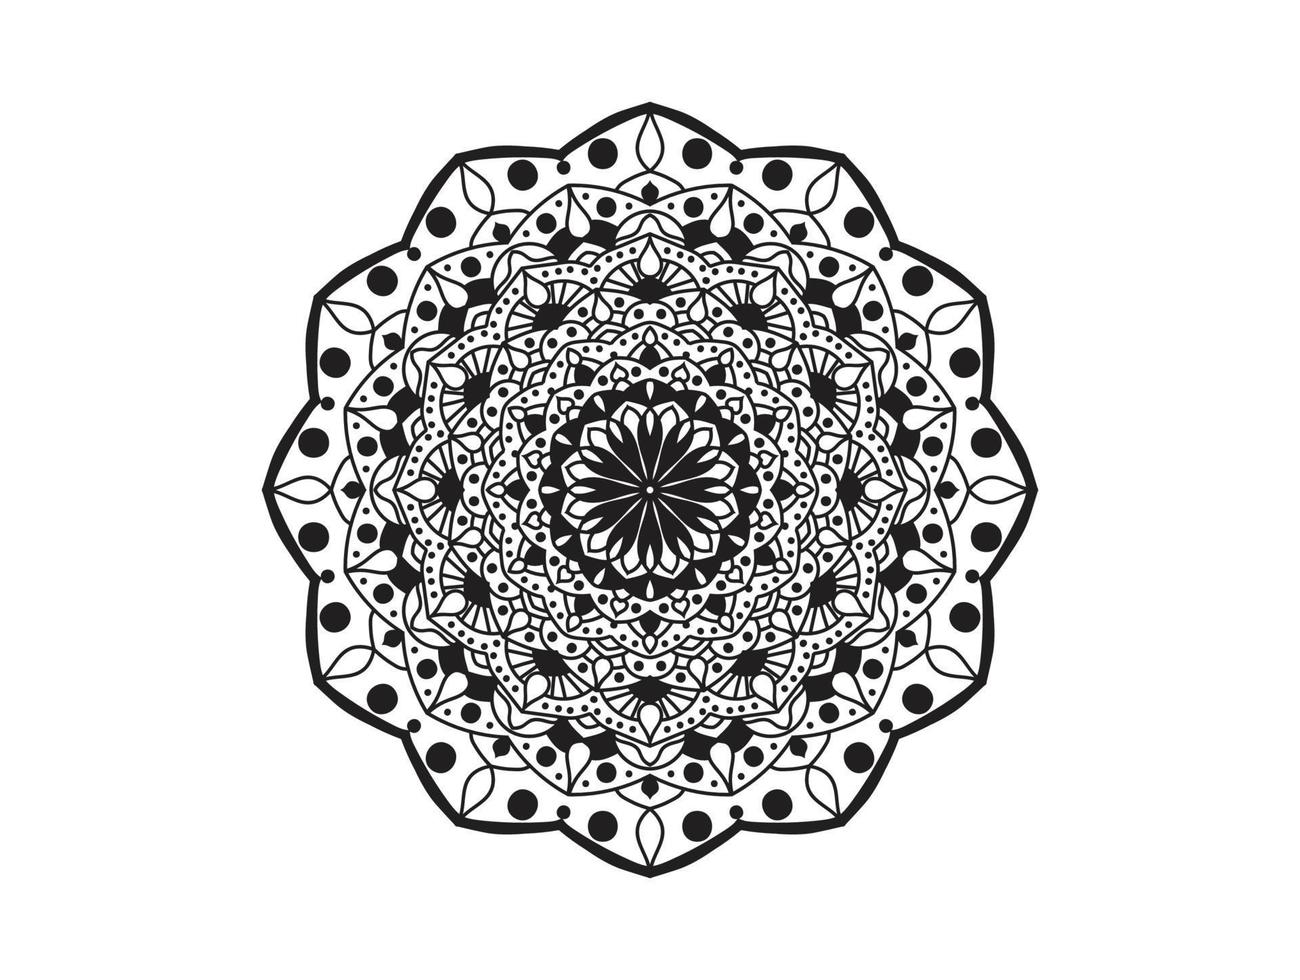 Circle pattern in the form of mandala for Henna, Mehndi, tattoos, decorative ornaments in ethnic oriental style, coloring book pages. vector